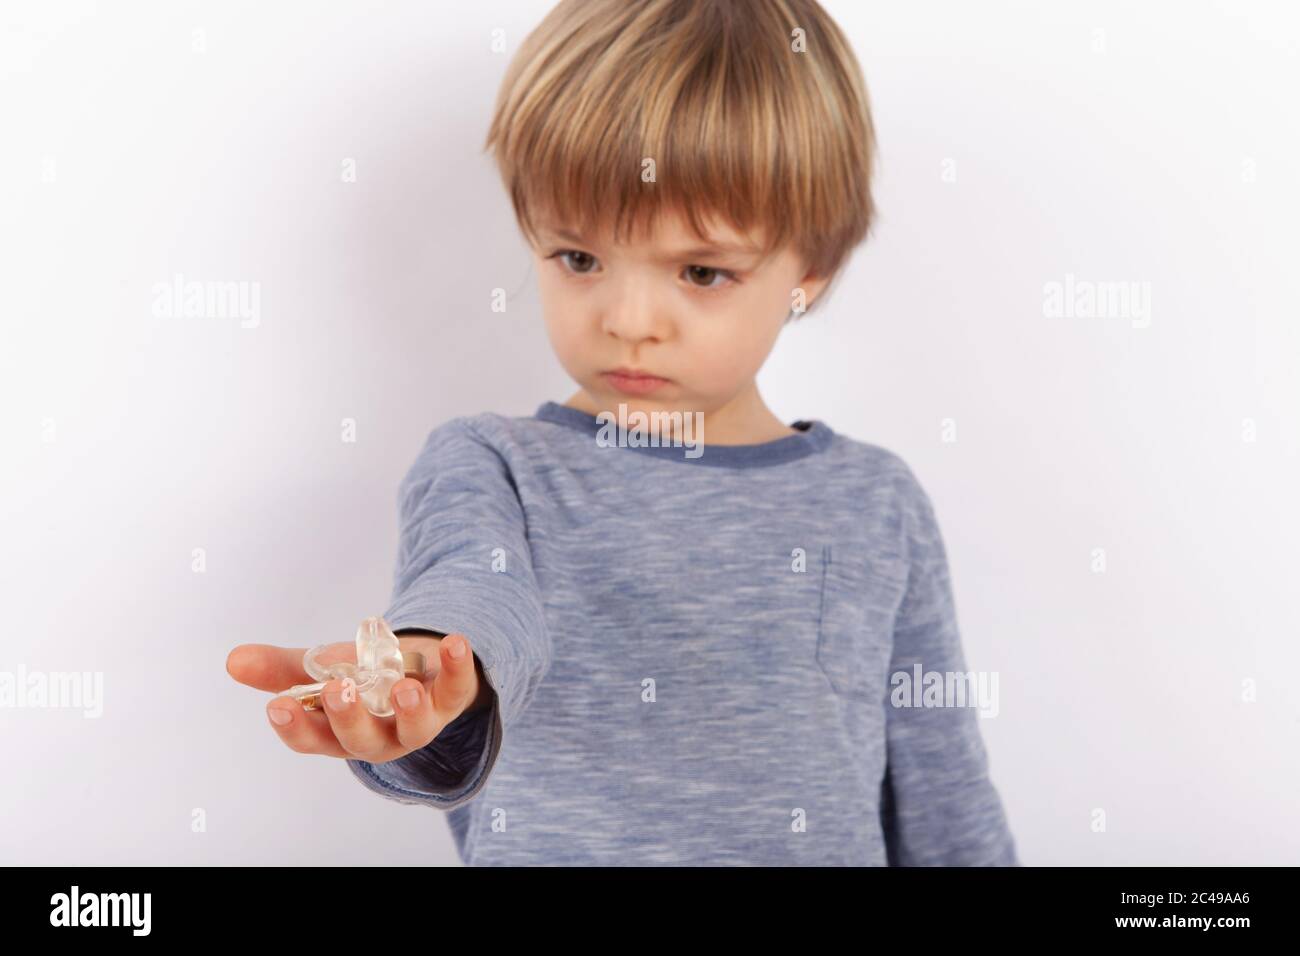 Cute small boy holding hearing aids on his palm. Focused on the hearing aid. Stock Photo